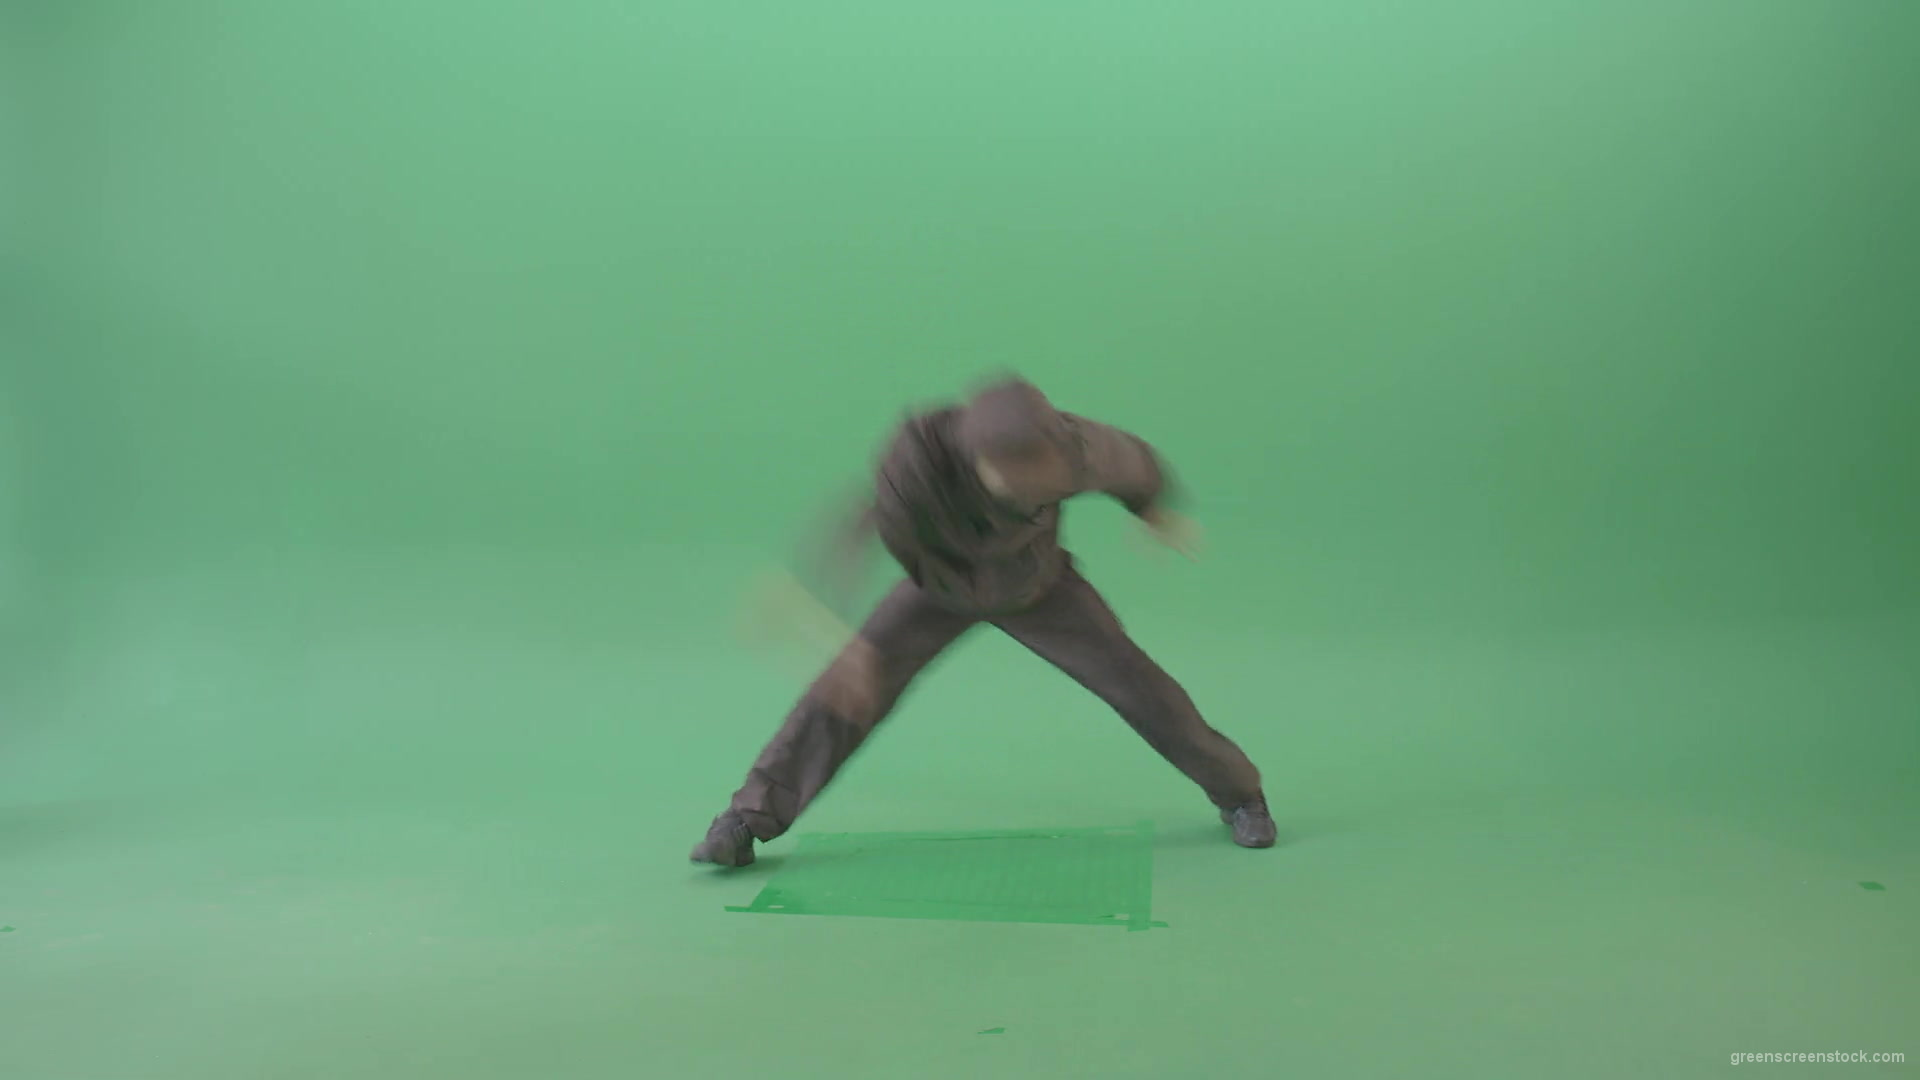 Hip-Hop-Dance-making-power-move-with-freeze-dancing-breakdance-on-green-screen-4K-Video-Footage-1920_004 Green Screen Stock